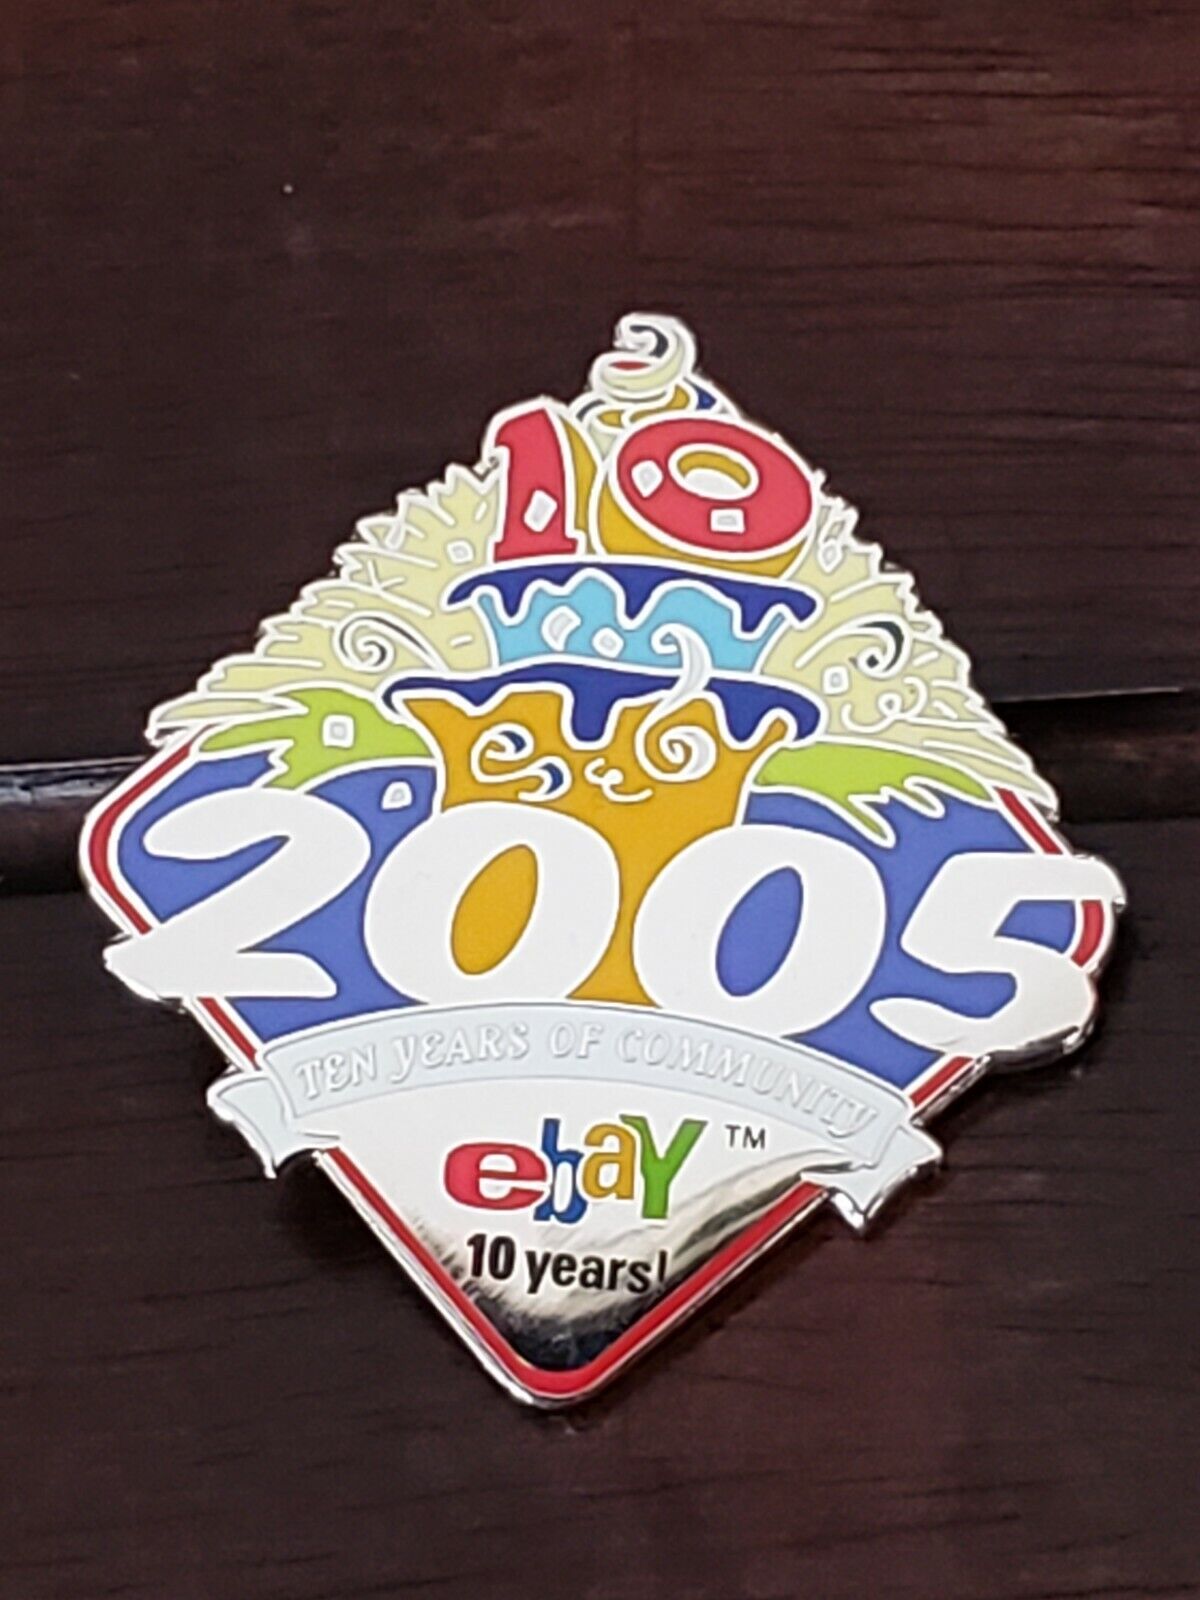 2005 eBay lapel hat pin 10 YEARS OF COMMUNITY collector\'s pin